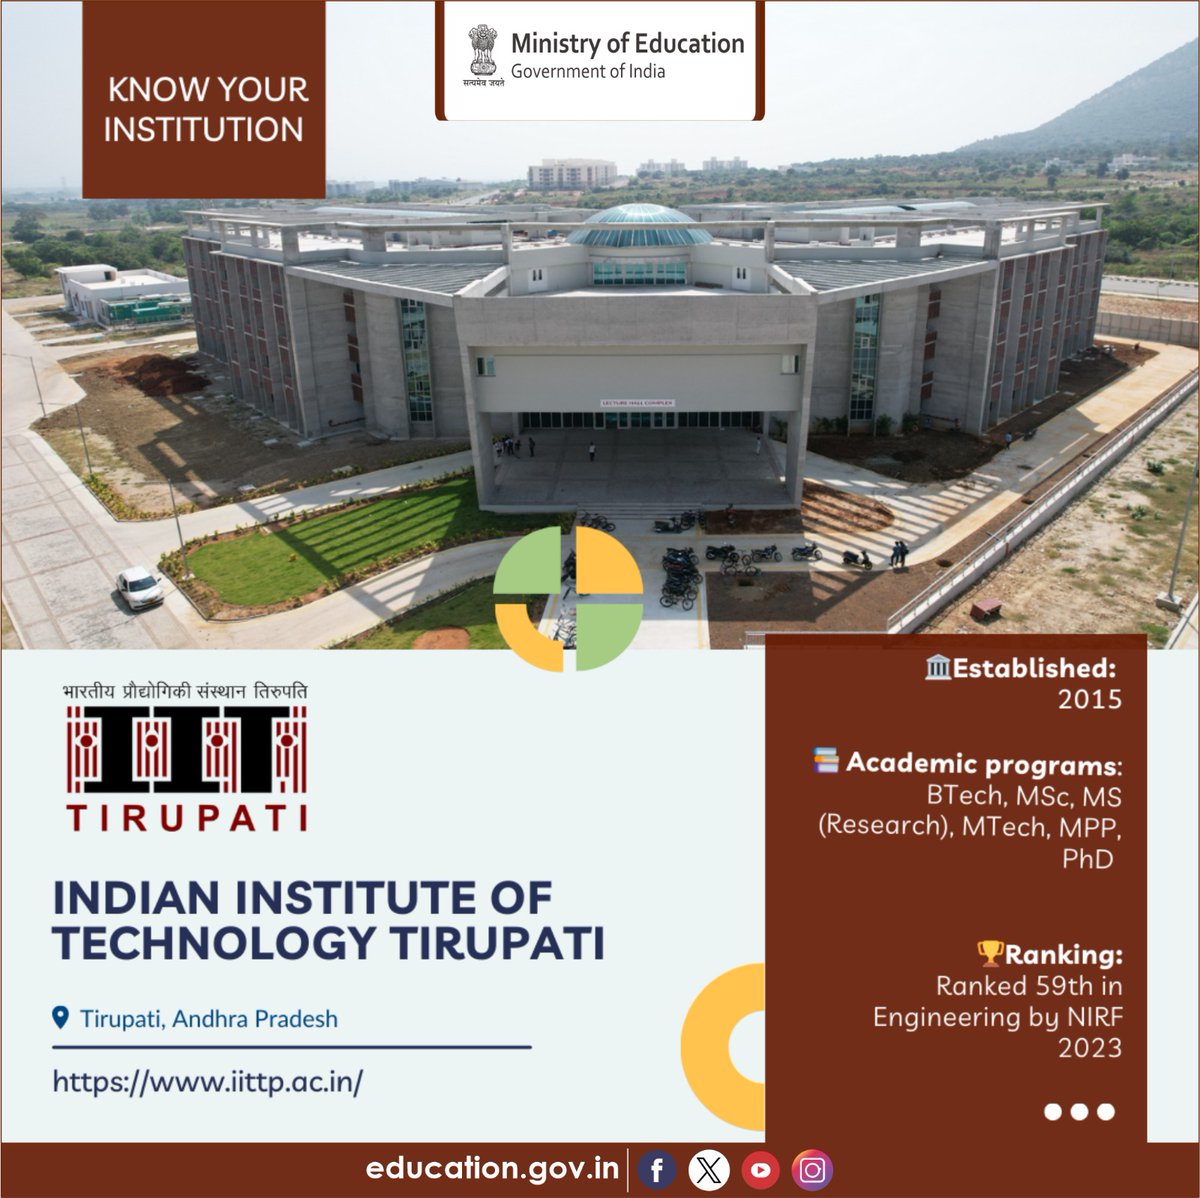 Know about the HEIs of India!

Established in 2015, Indian Institute of Technology Tirupati (IIT Tirupati) has carved a niche for itself in the realm of technical education and research in India. Offering a diverse array of academic programs including BTech, MSc, MS (Research),…